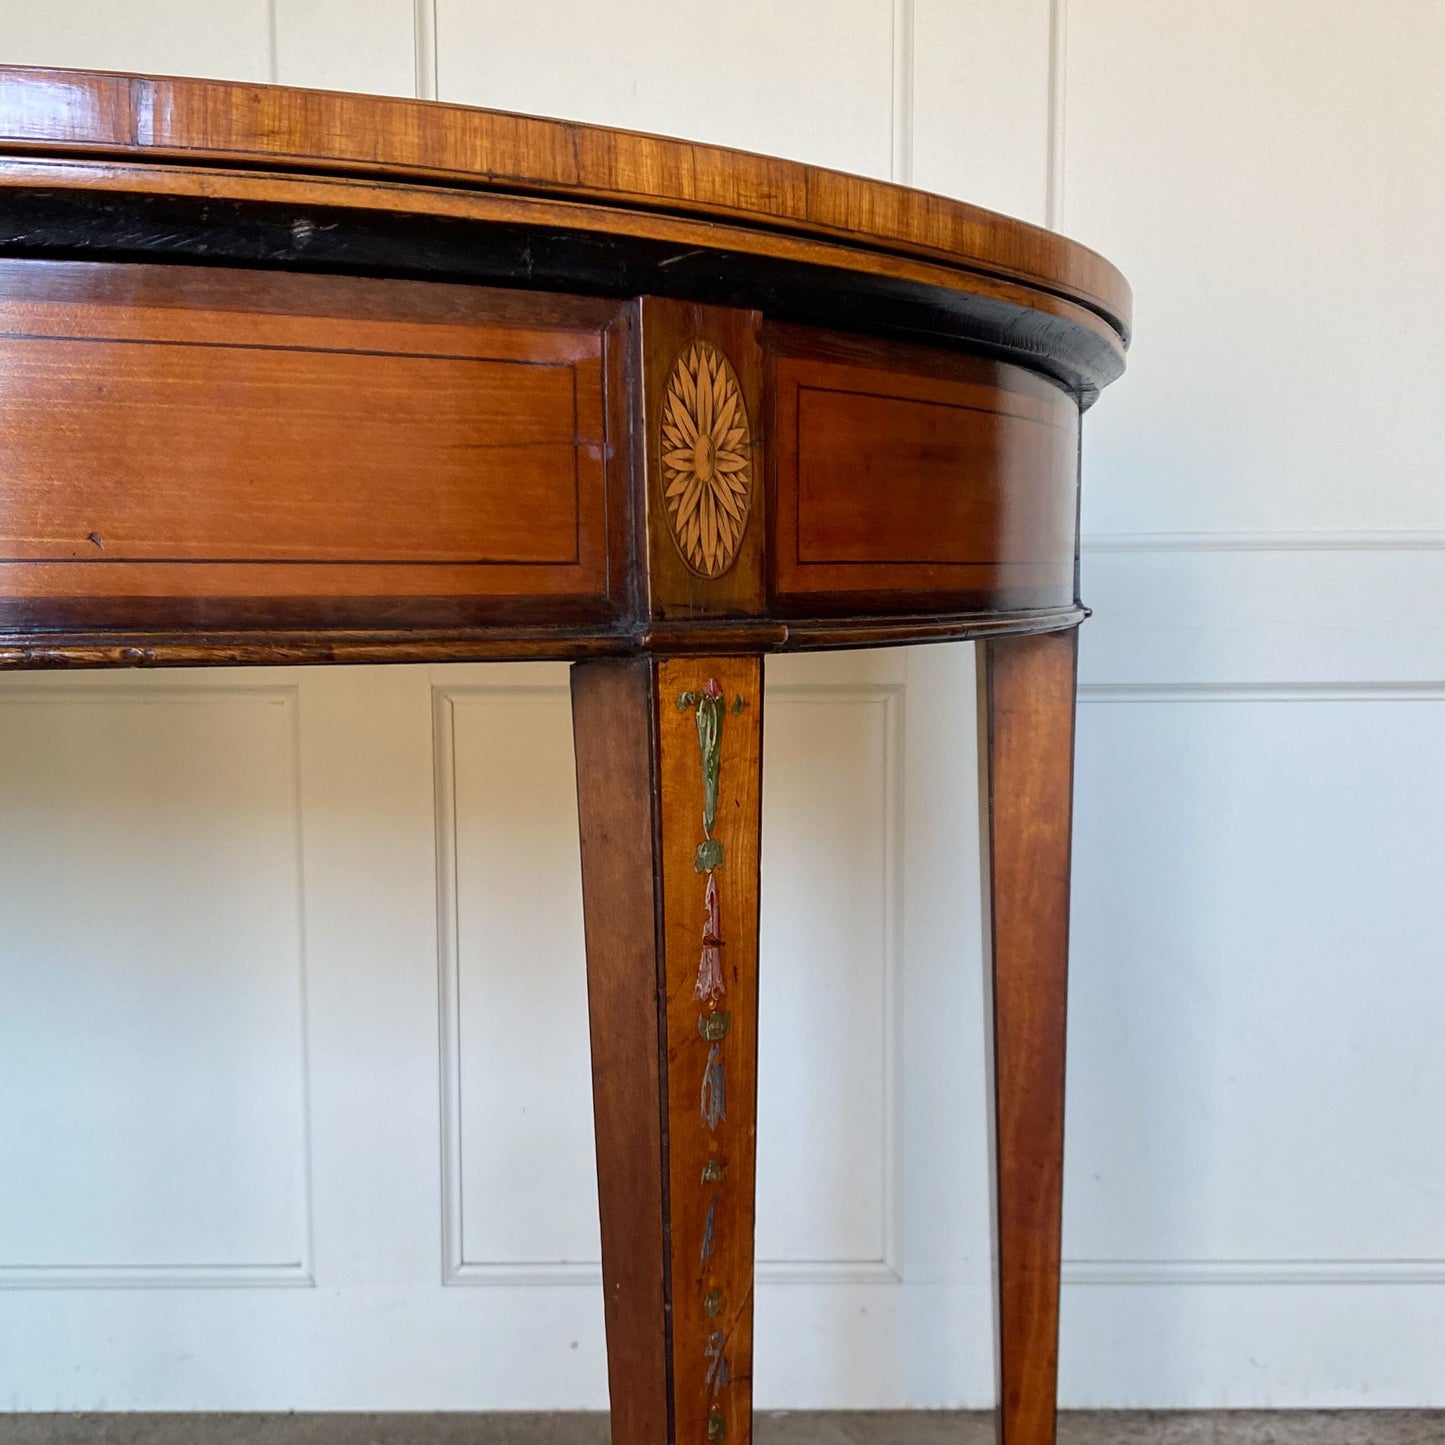 A George III satinwood and marquetry demilune folding card table, with a fold over top fitted with green baize. The top features a beautiful fan inlay and crossbanding around the outside, with the frieze incorporating purple heart crossbanding, over four elegantly tapering legs with floral painted decoration. The rear legs are hinged to swing out and support the folding top. In very good, sturdy overall condition. Would work well as a side console table, or a centre hall table.